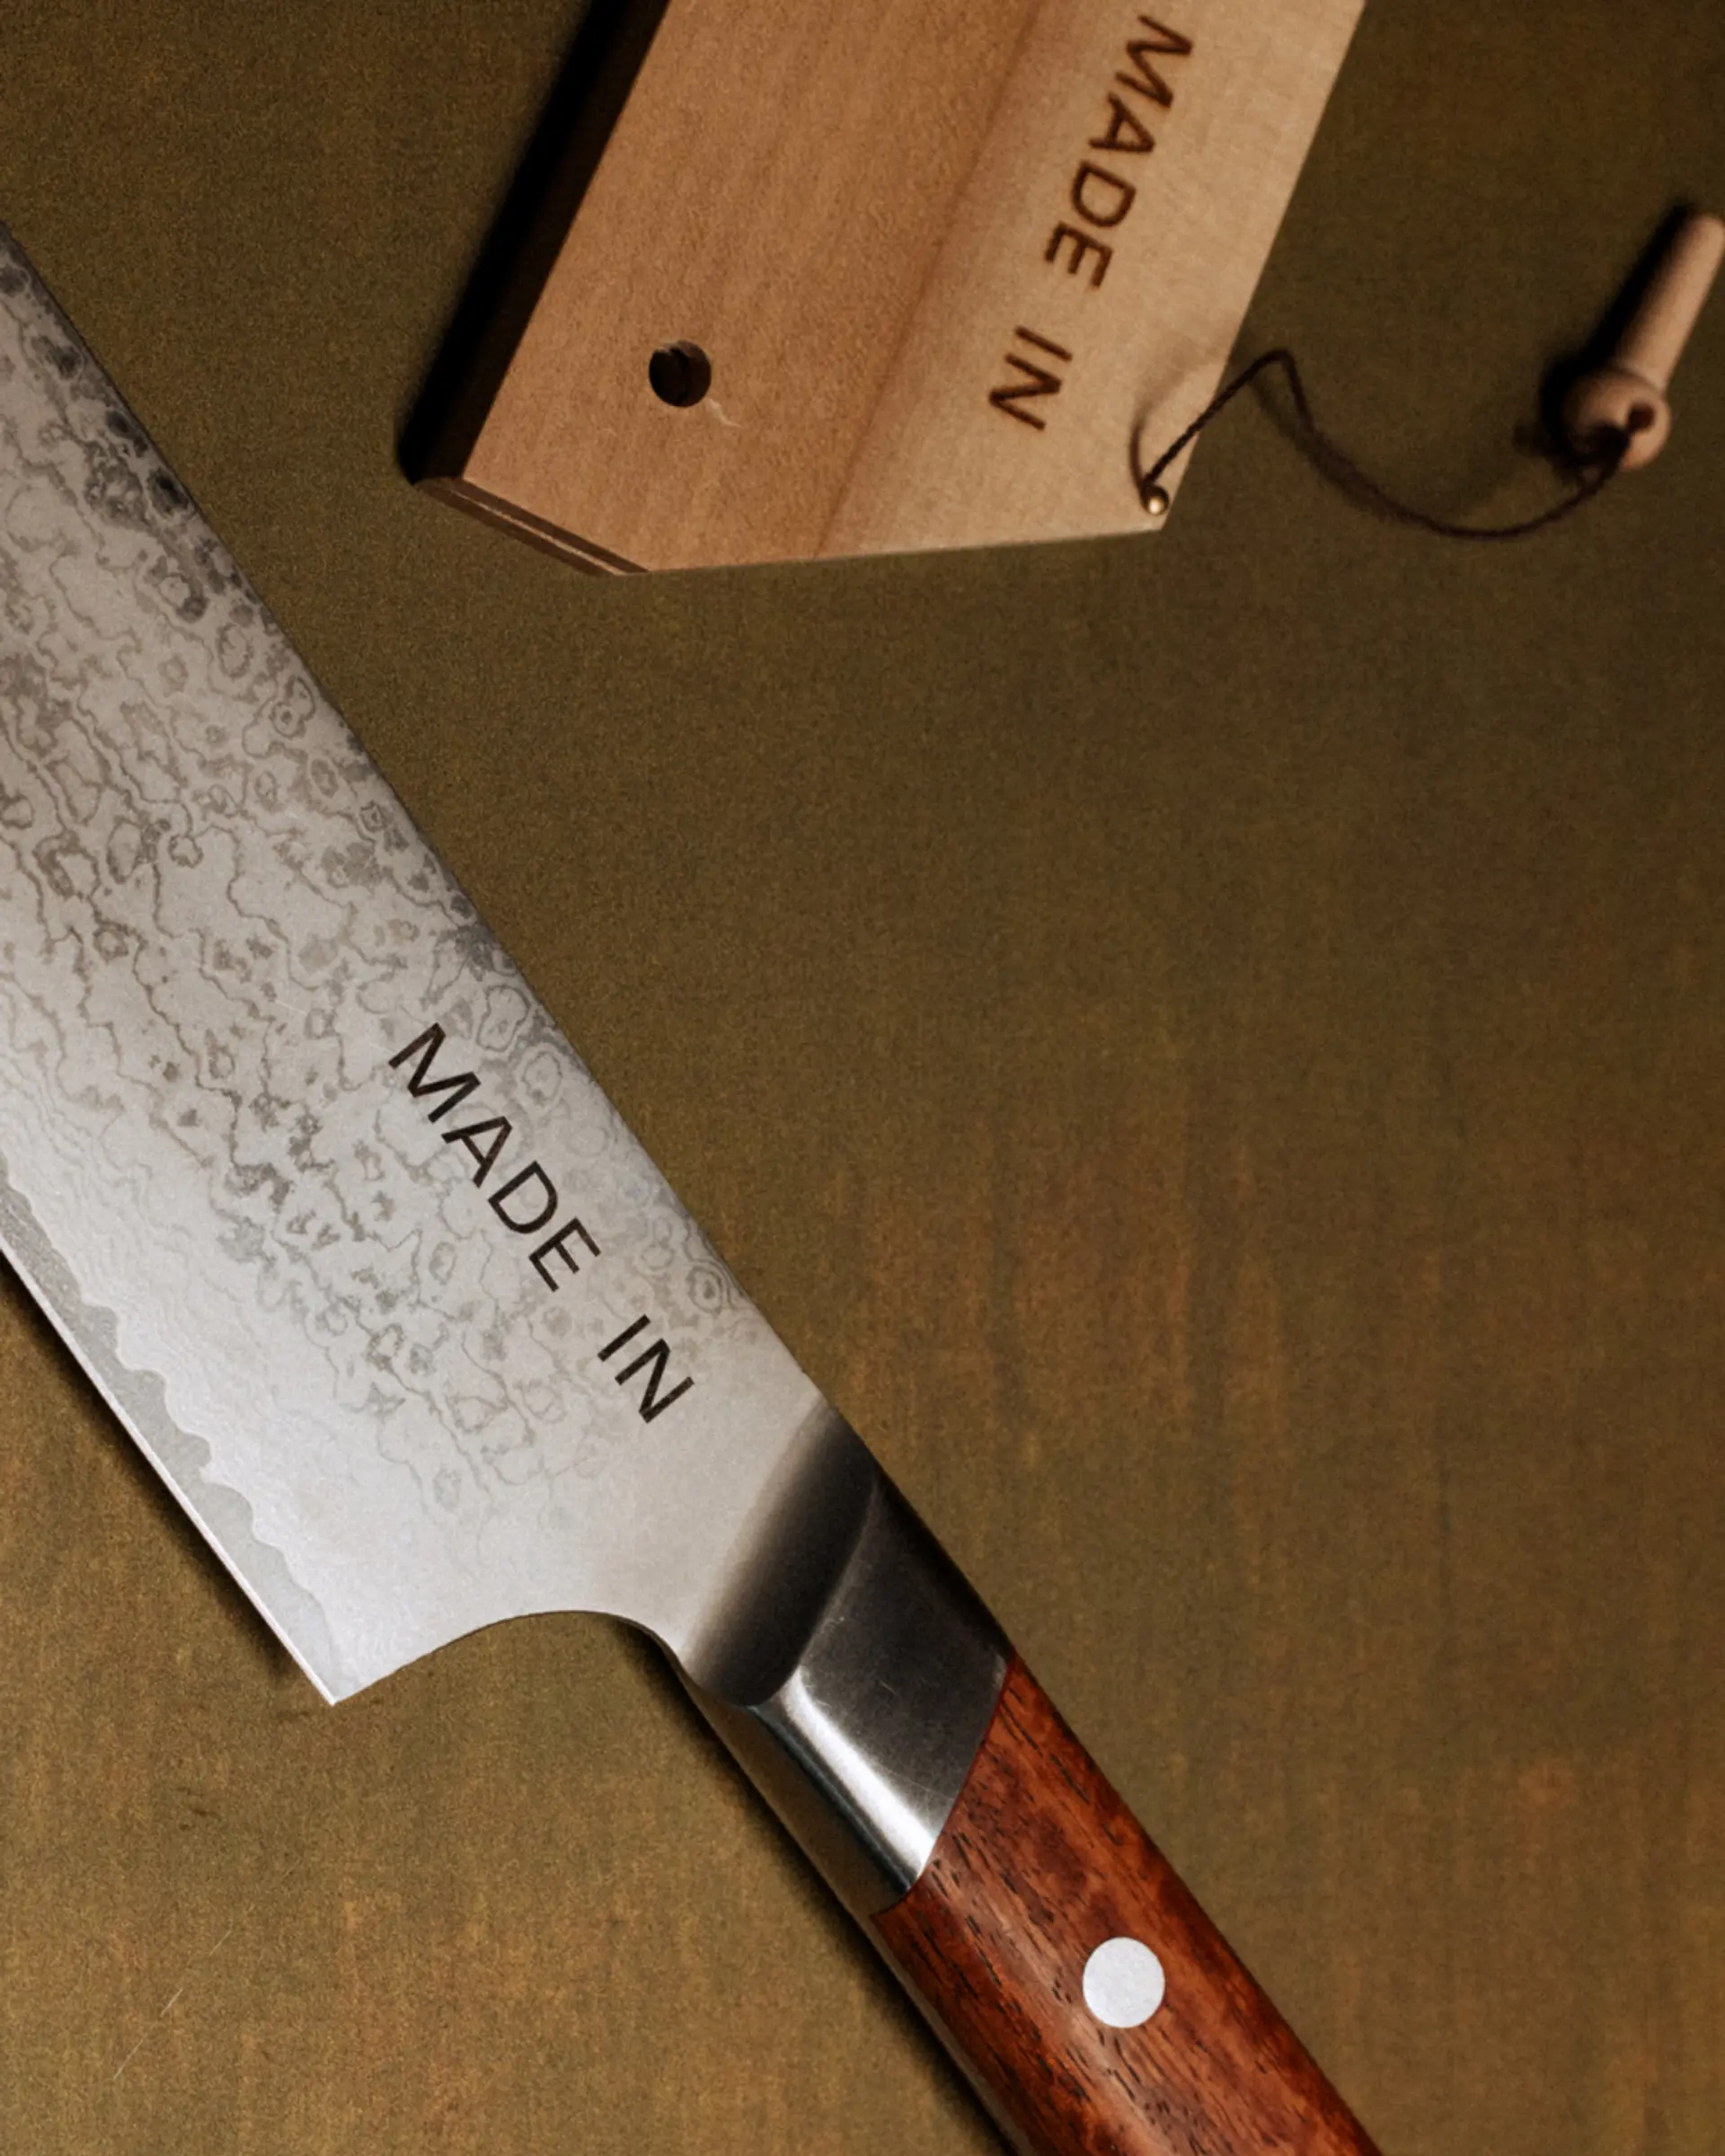 A close-up of a kitchen knife with a wooden handle shows "MADE IN" inscribed on the blade, alongside its packaging tag repeating the phrase.